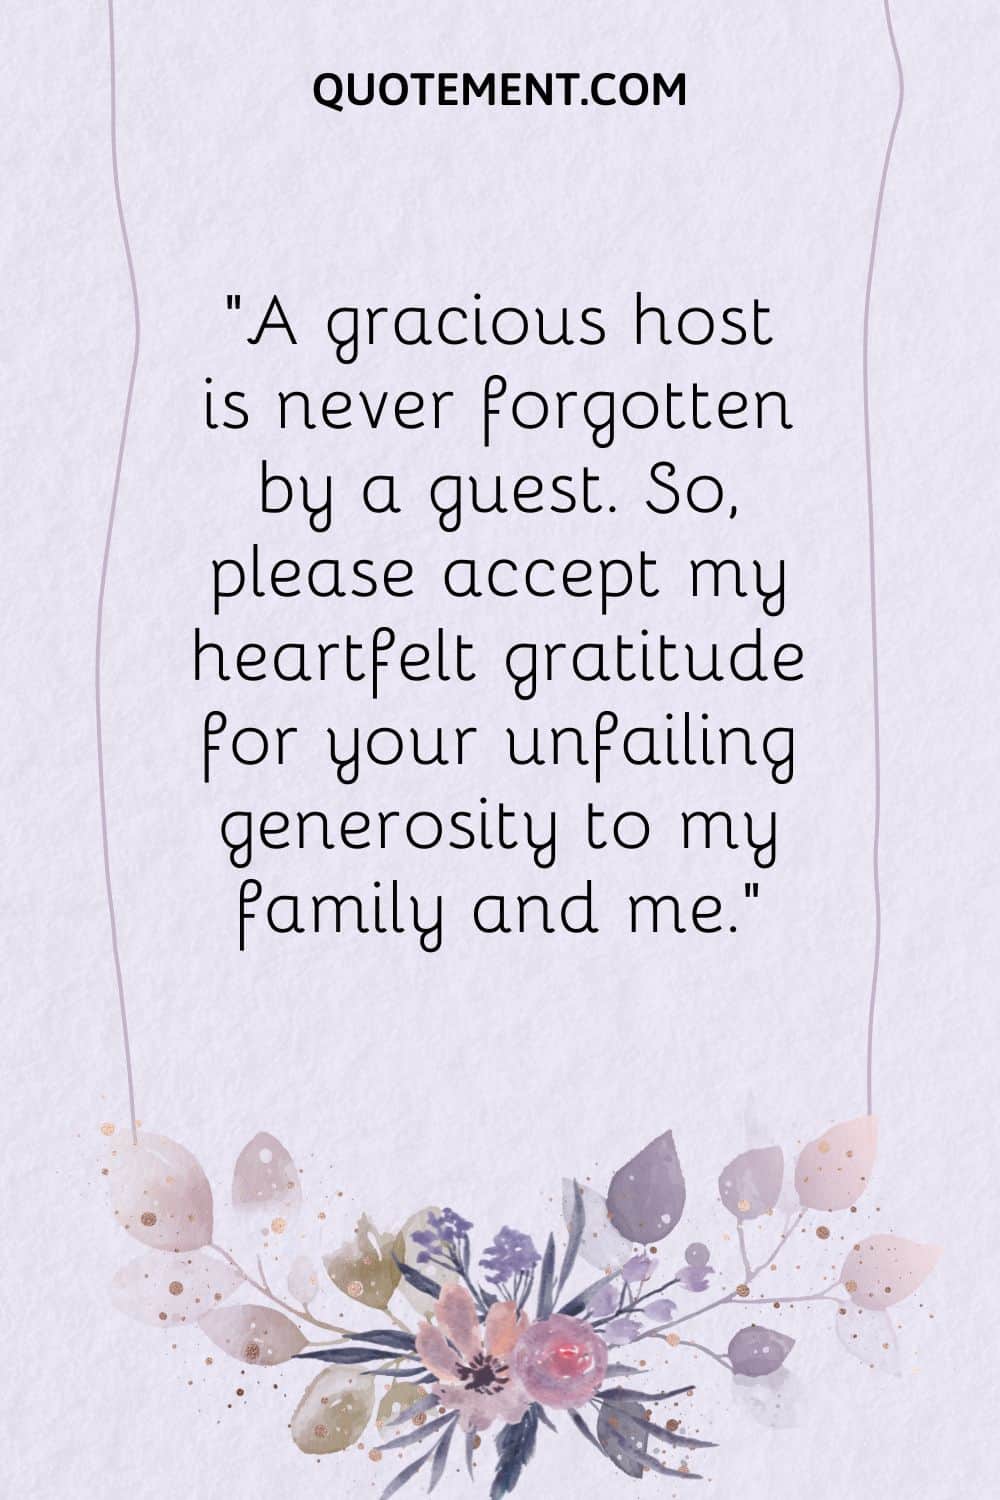 A gracious host is never forgotten by a guest